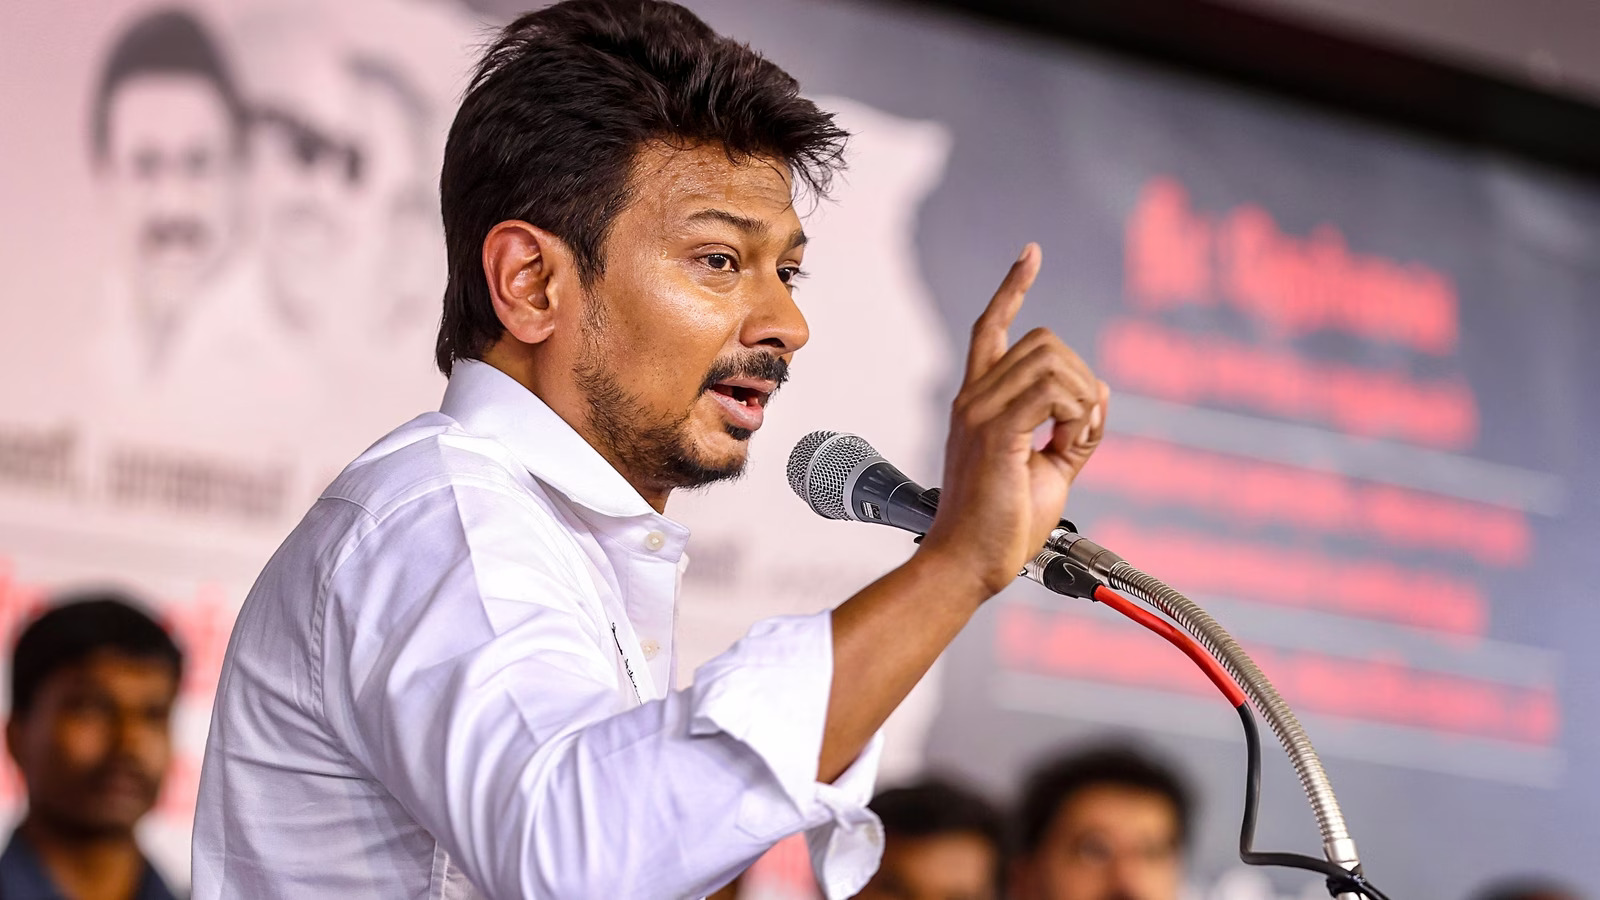 Udhayanidhi Stalin: Sparks controversy with his remarks about “Sanatana Dharma”, ready to face legal challenges